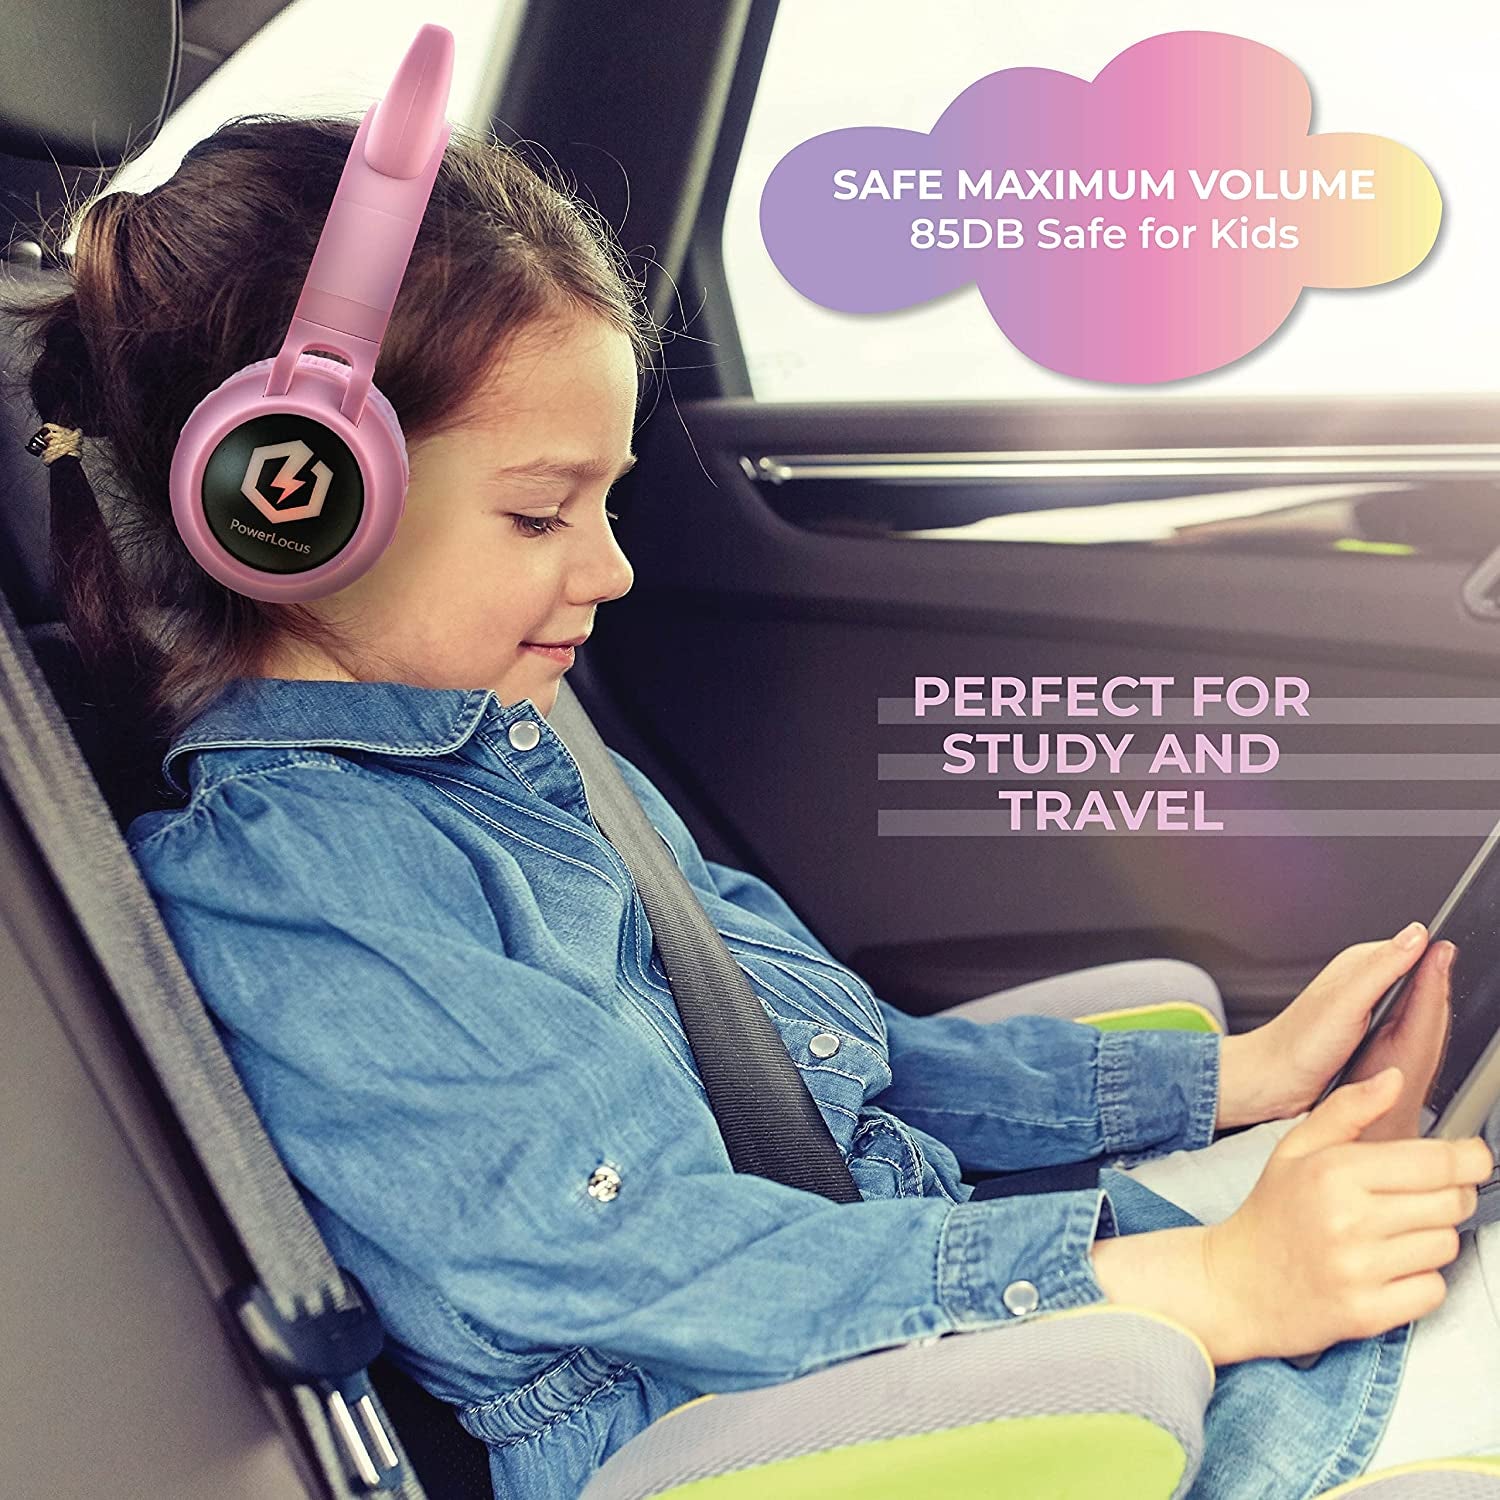 Wireless Bluetooth Headphones for Kids, Kid Headphone Over-Ear with LED Lights, Foldable Headphones with Microphone,Volume Limited, Wireless and Wired Headphone for Phones,Tablets,Pc,Laptop